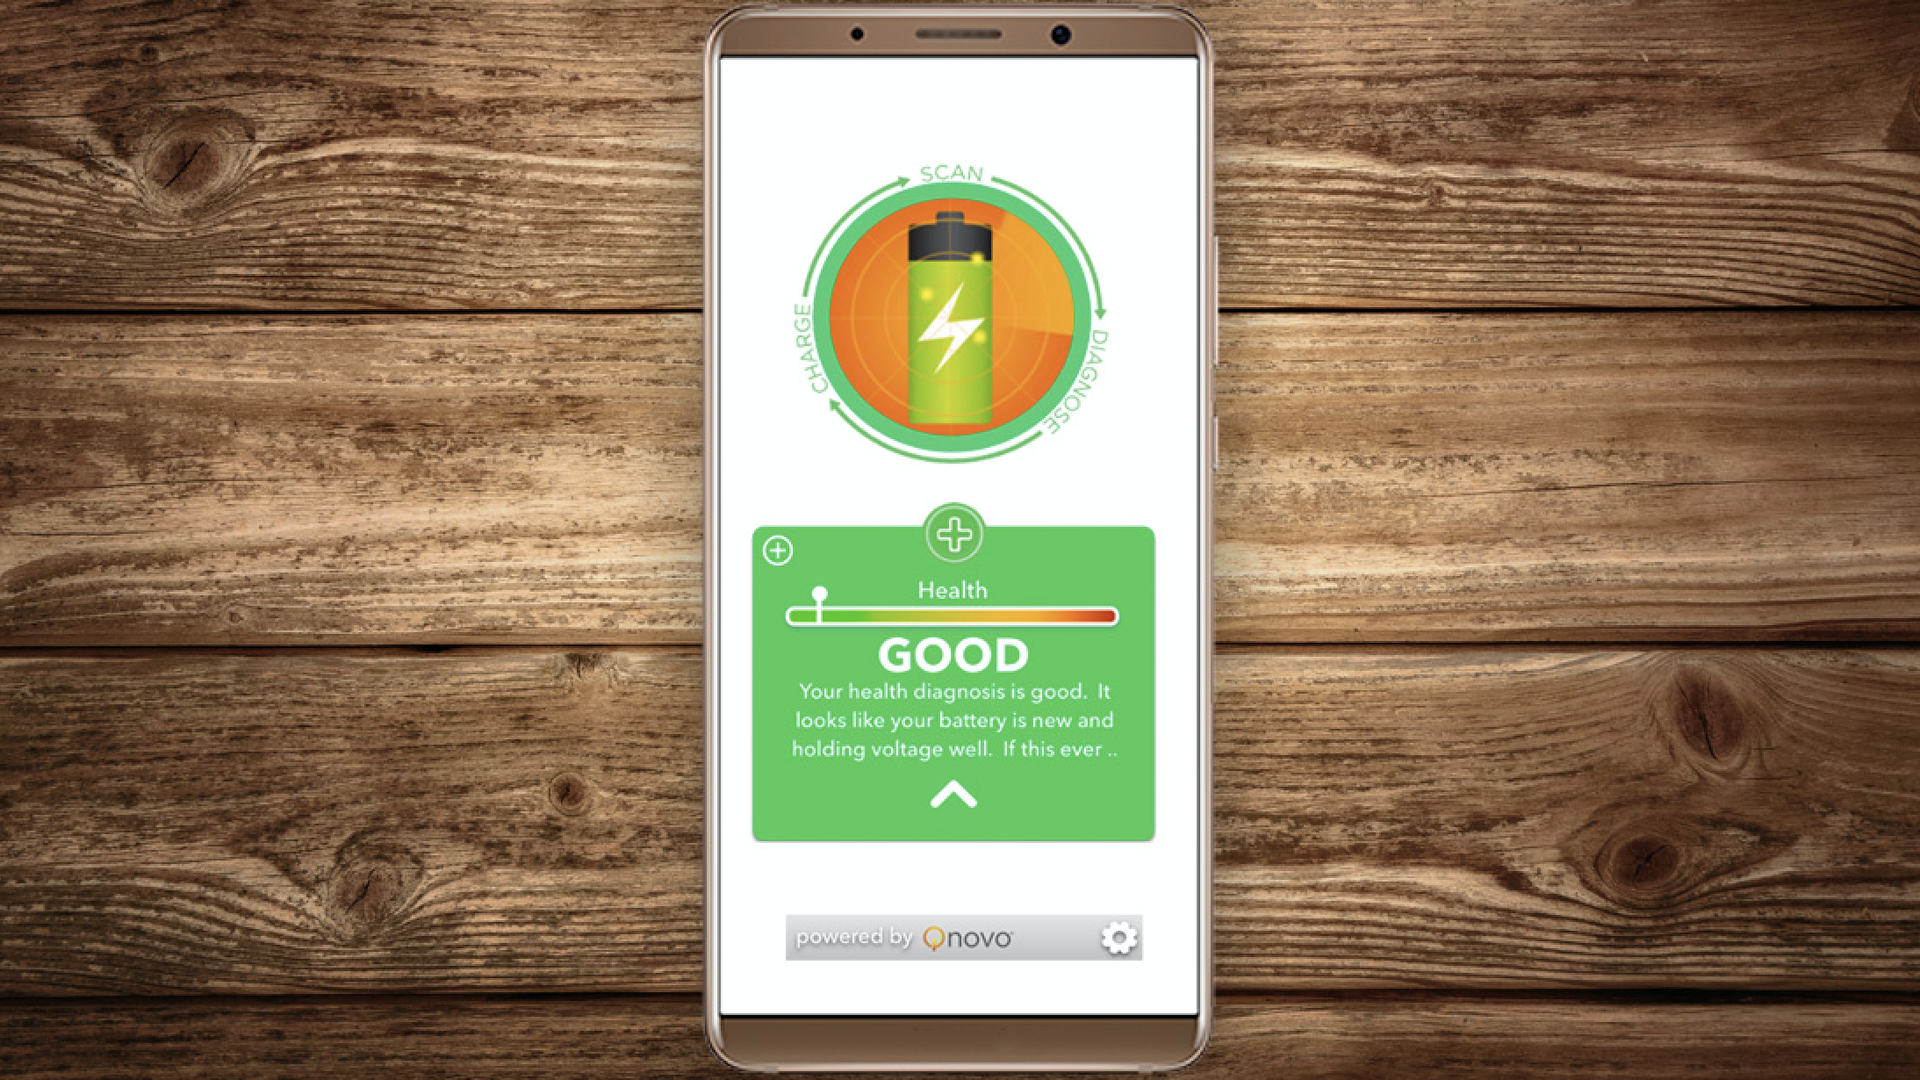 In this image, a cell phone lays on a wooden table and displays a green battery symbol with a "Good" health rating.